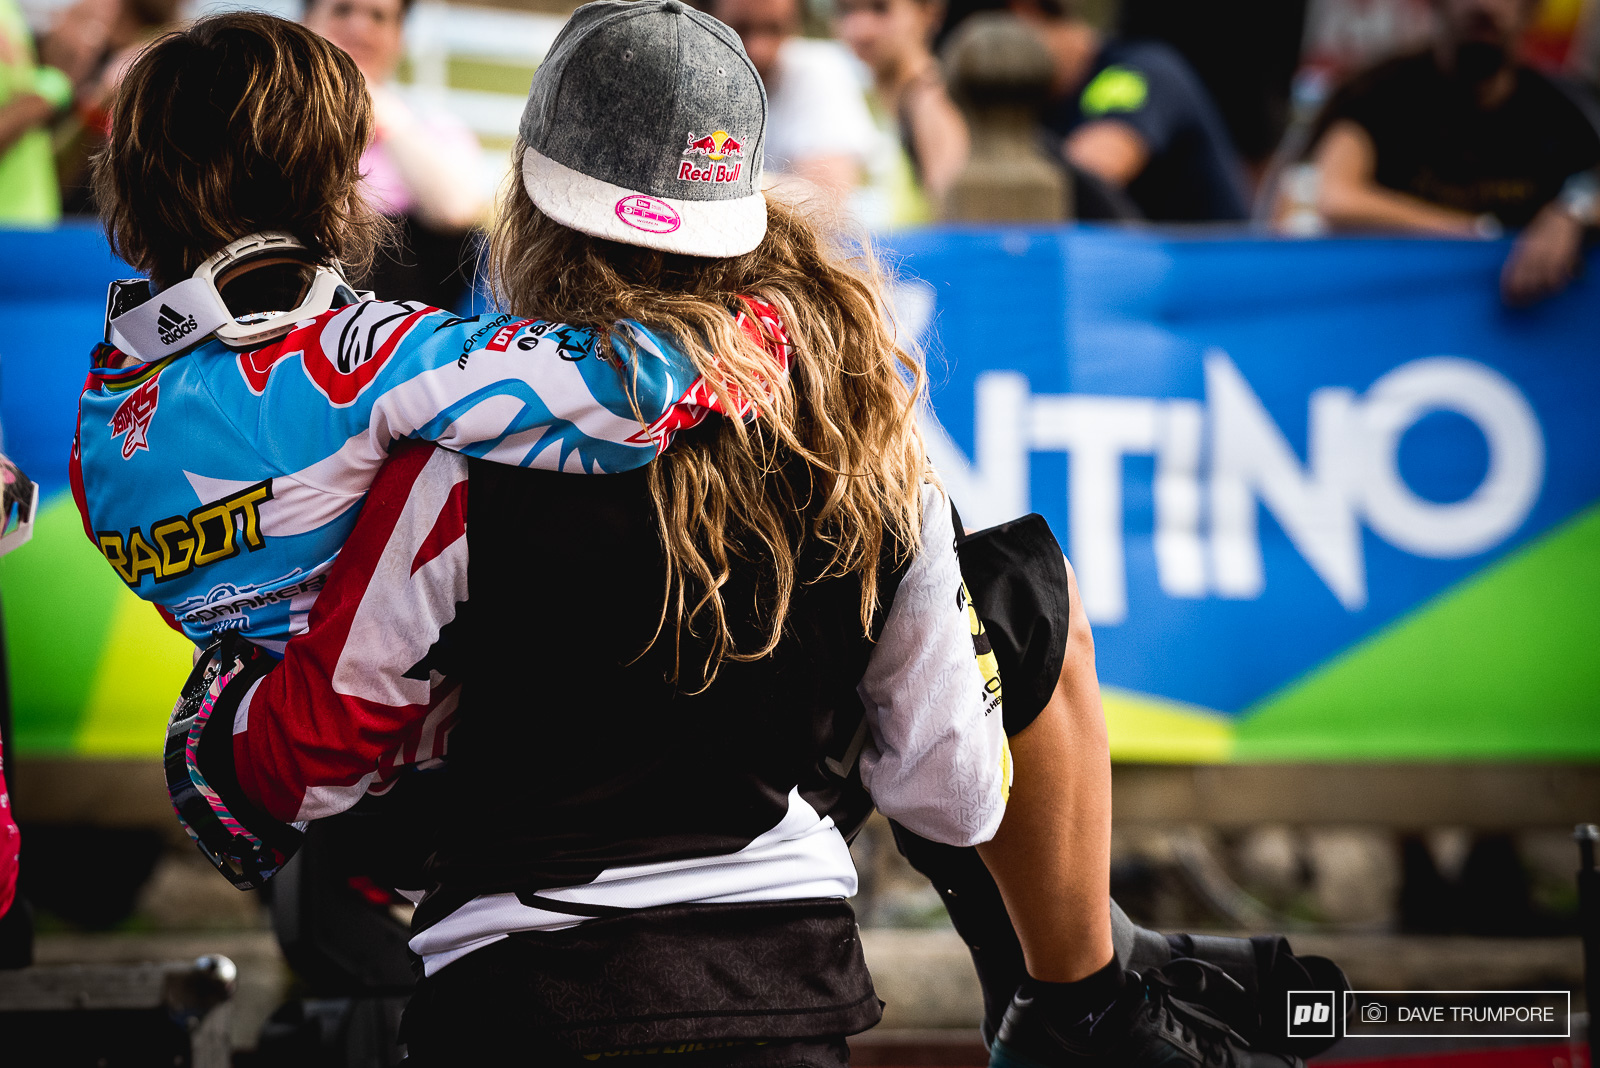 Though bittersweet, this moment was perhaps the perfect ending to the career of Emmeline Ragot, carried off stage by her biggest rival of the past decade.  The level at the top end of the women's field is so high right now entirely because of these two.